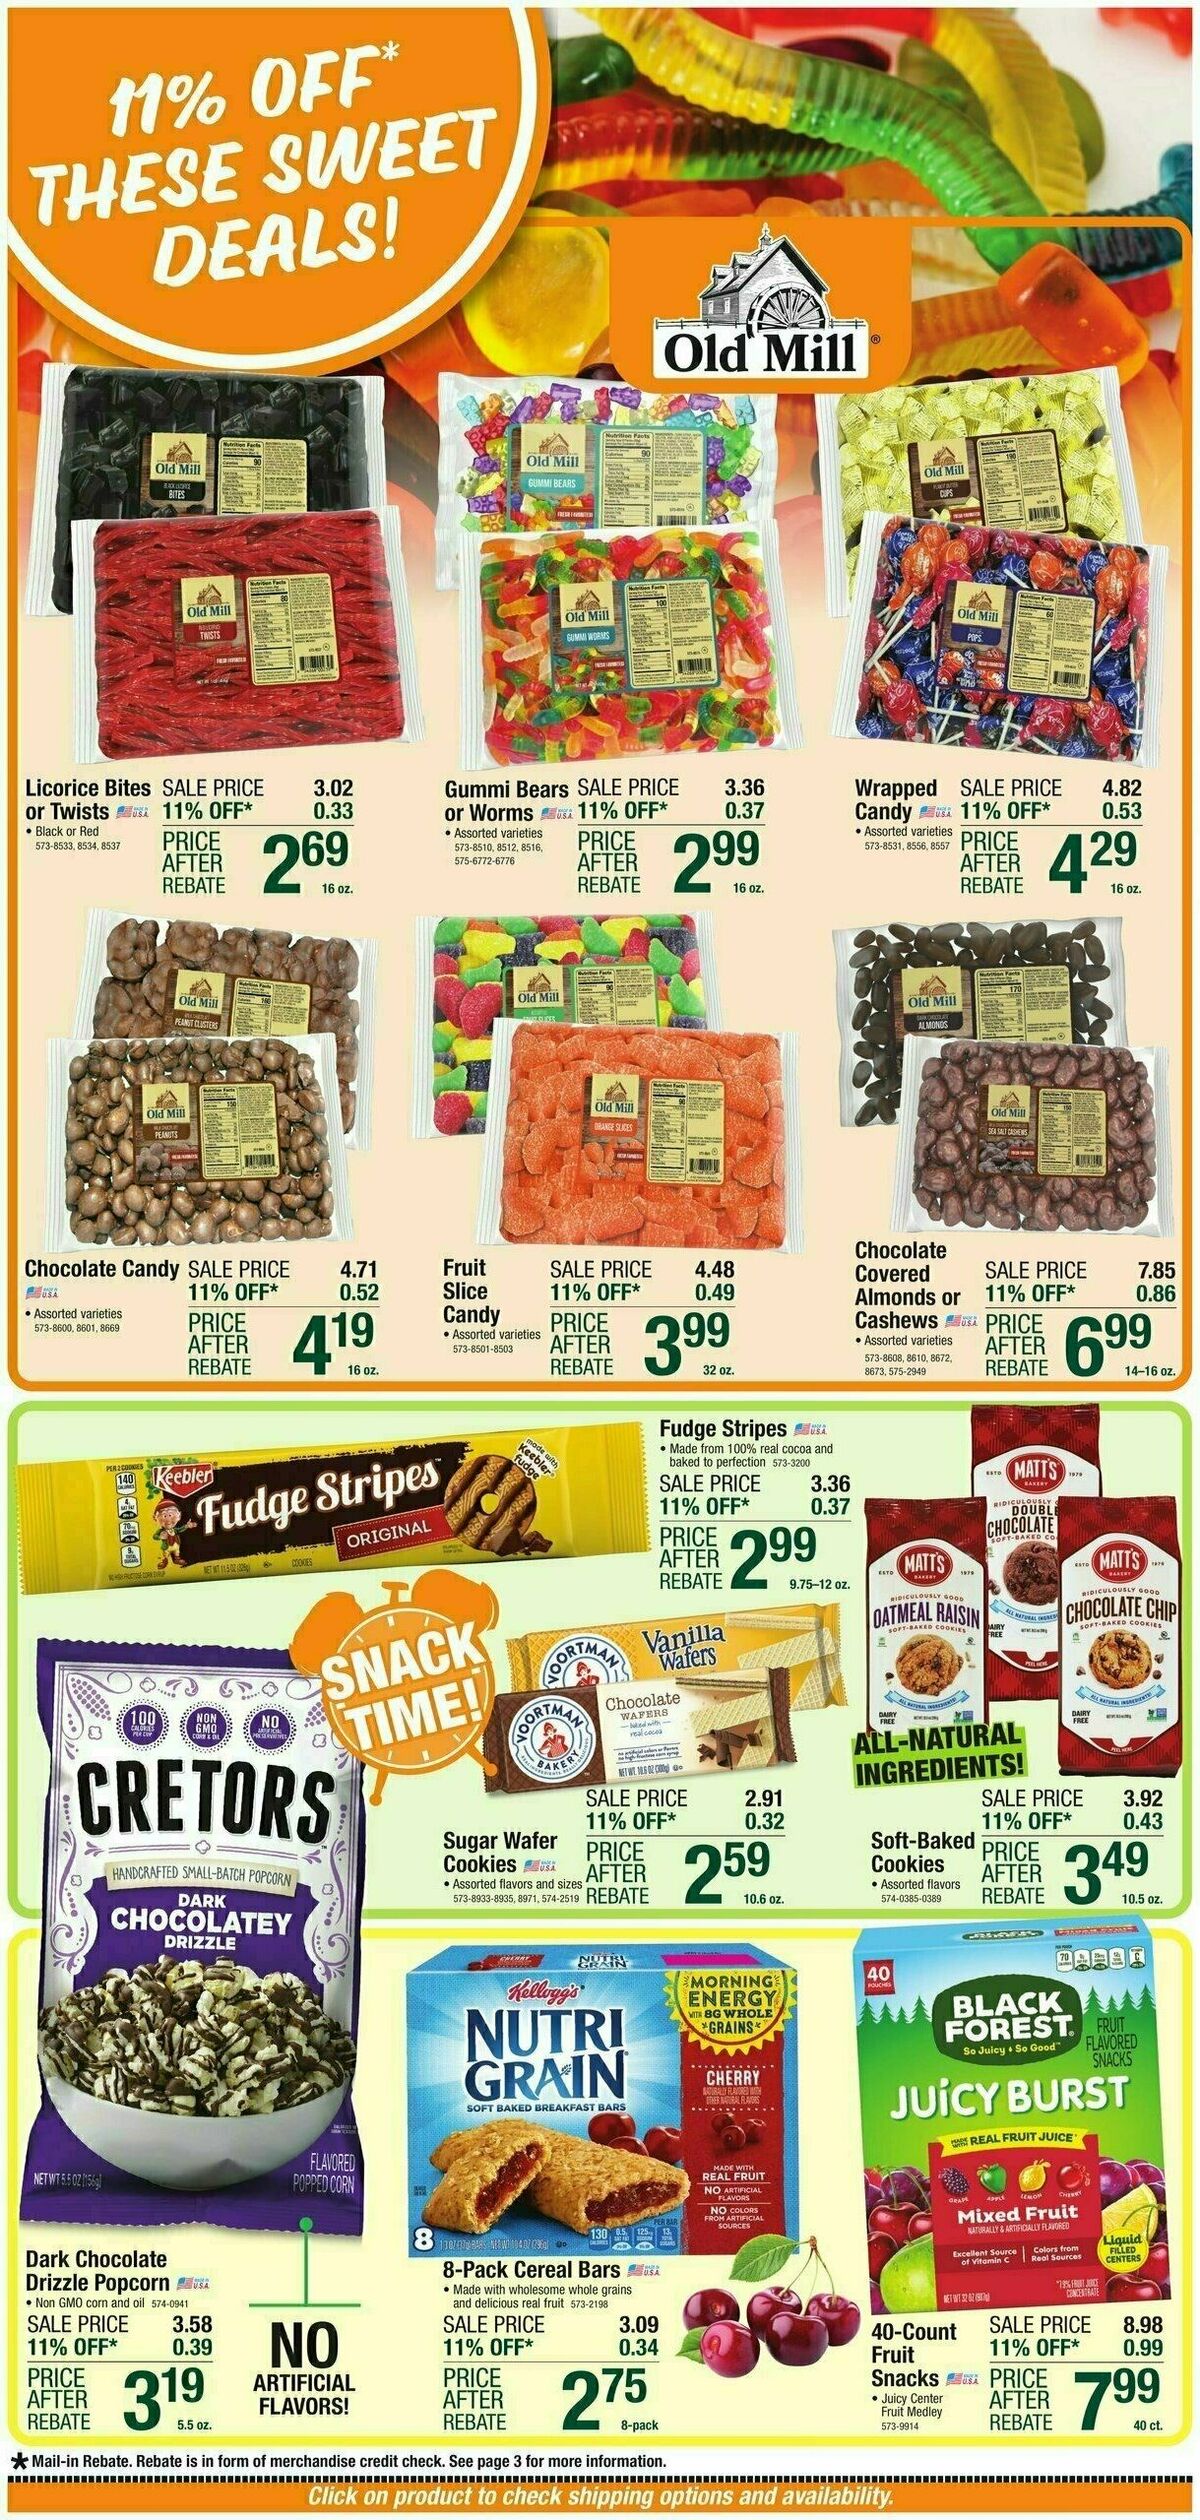 Menards Home Essentials Weekly Ad from September 6